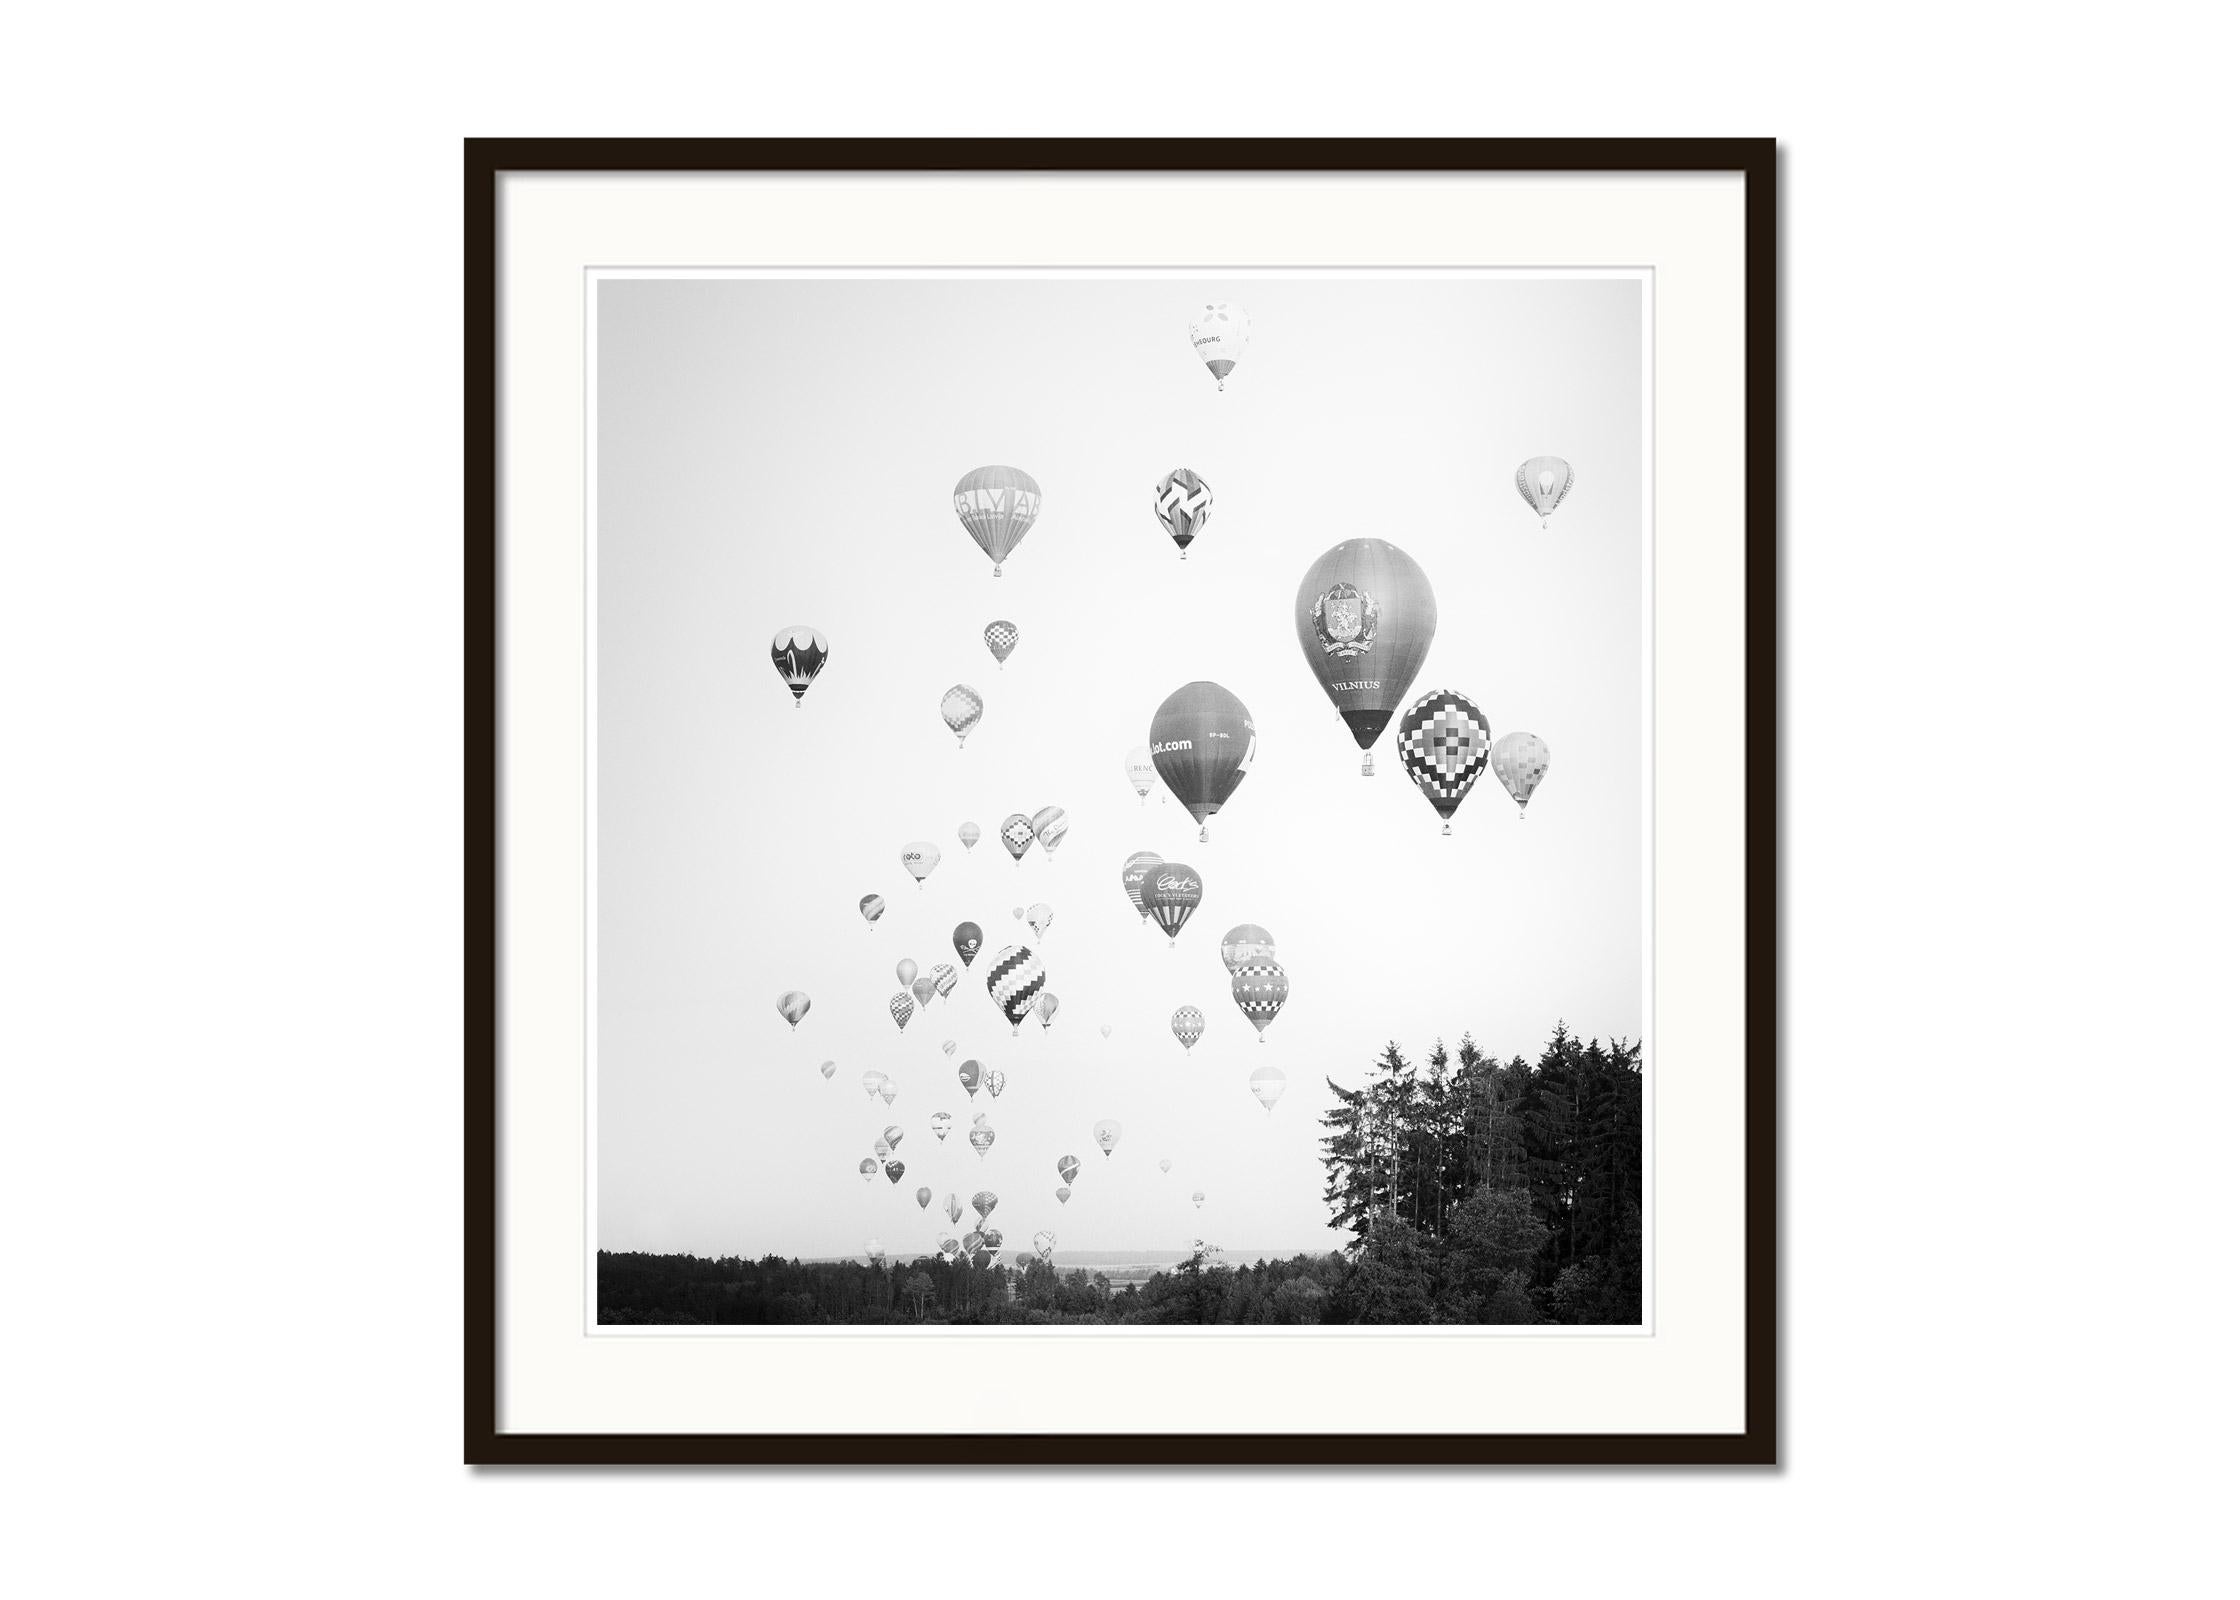 Hot Air Balloon World Championship, black and white art photography, landscape - Contemporary Photograph by Gerald Berghammer, Ina Forstinger